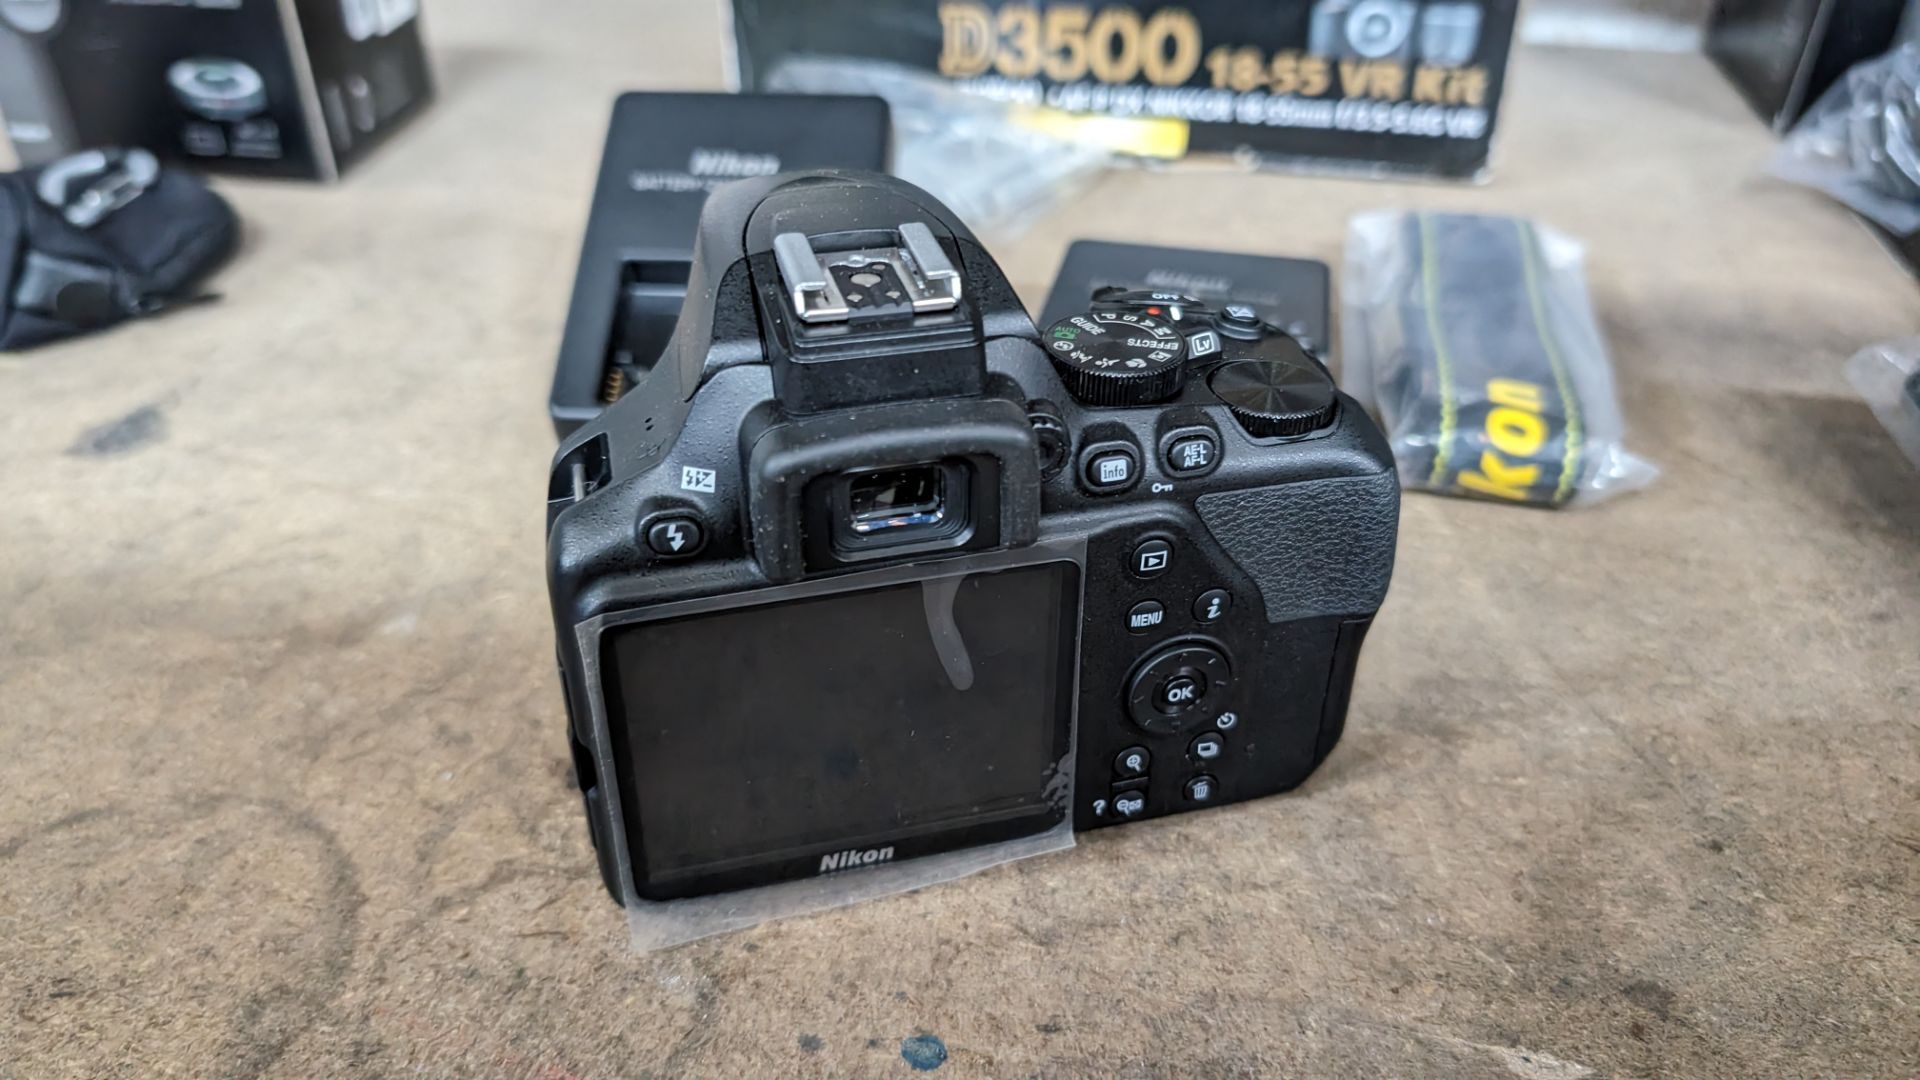 Nikon D3500 camera. Although this camera is in a box for a kit including a lens, this lot just comp - Bild 6 aus 8